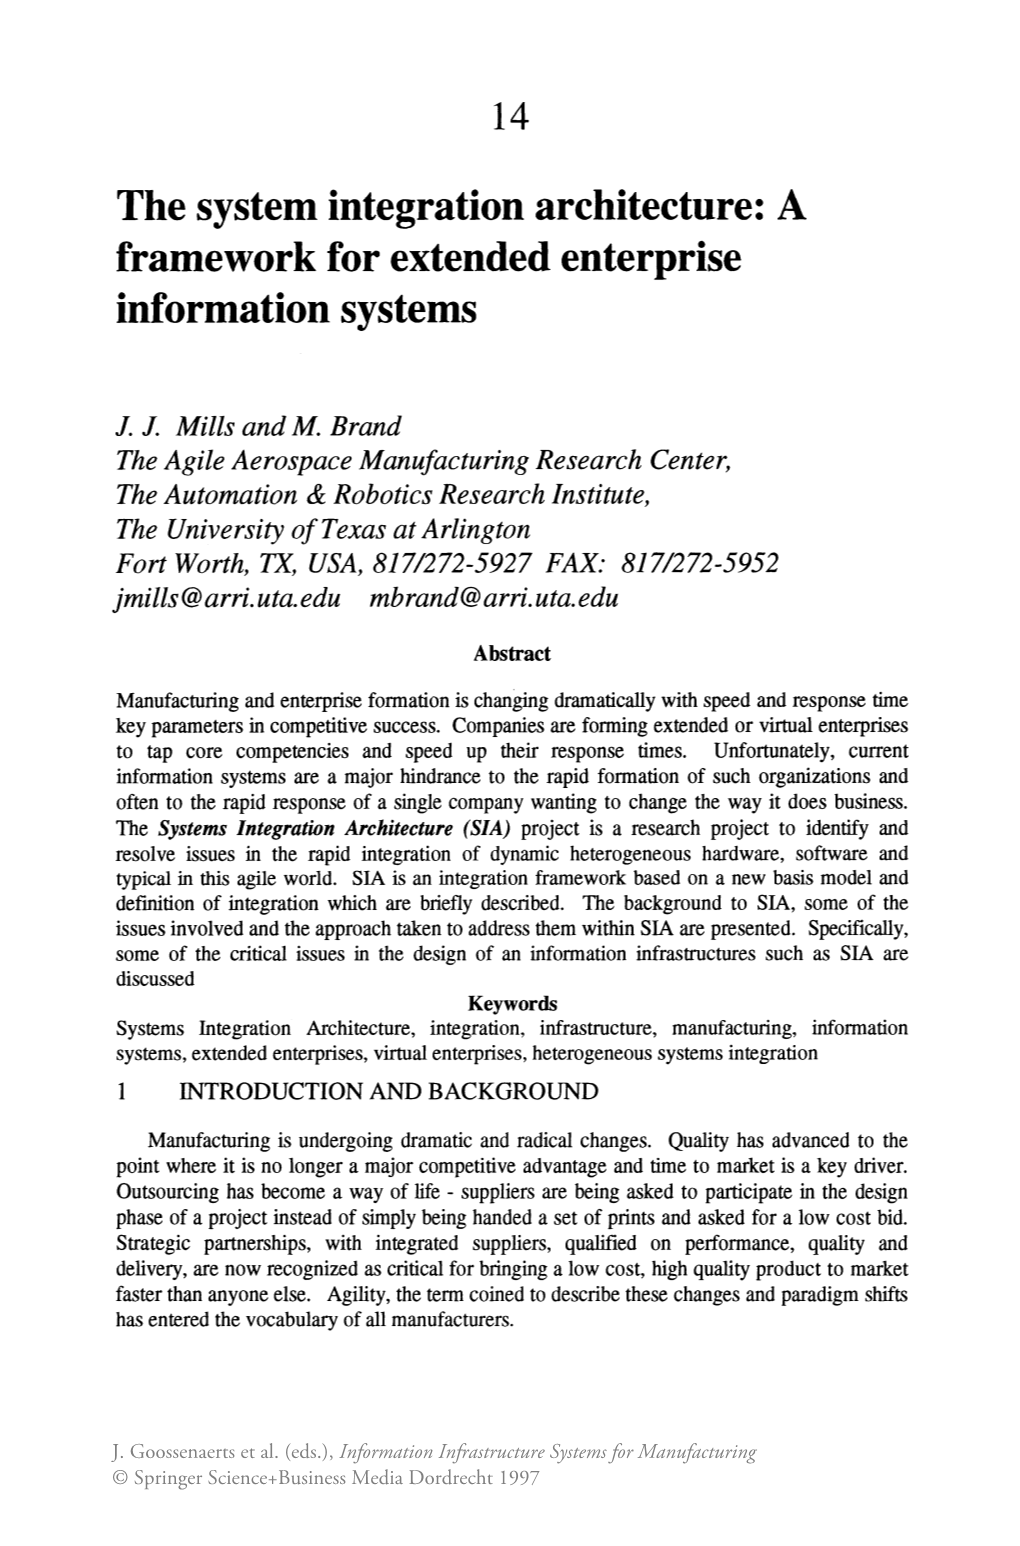 The System Integration Architecture: a Framework for Extended Enterprise Information Systems